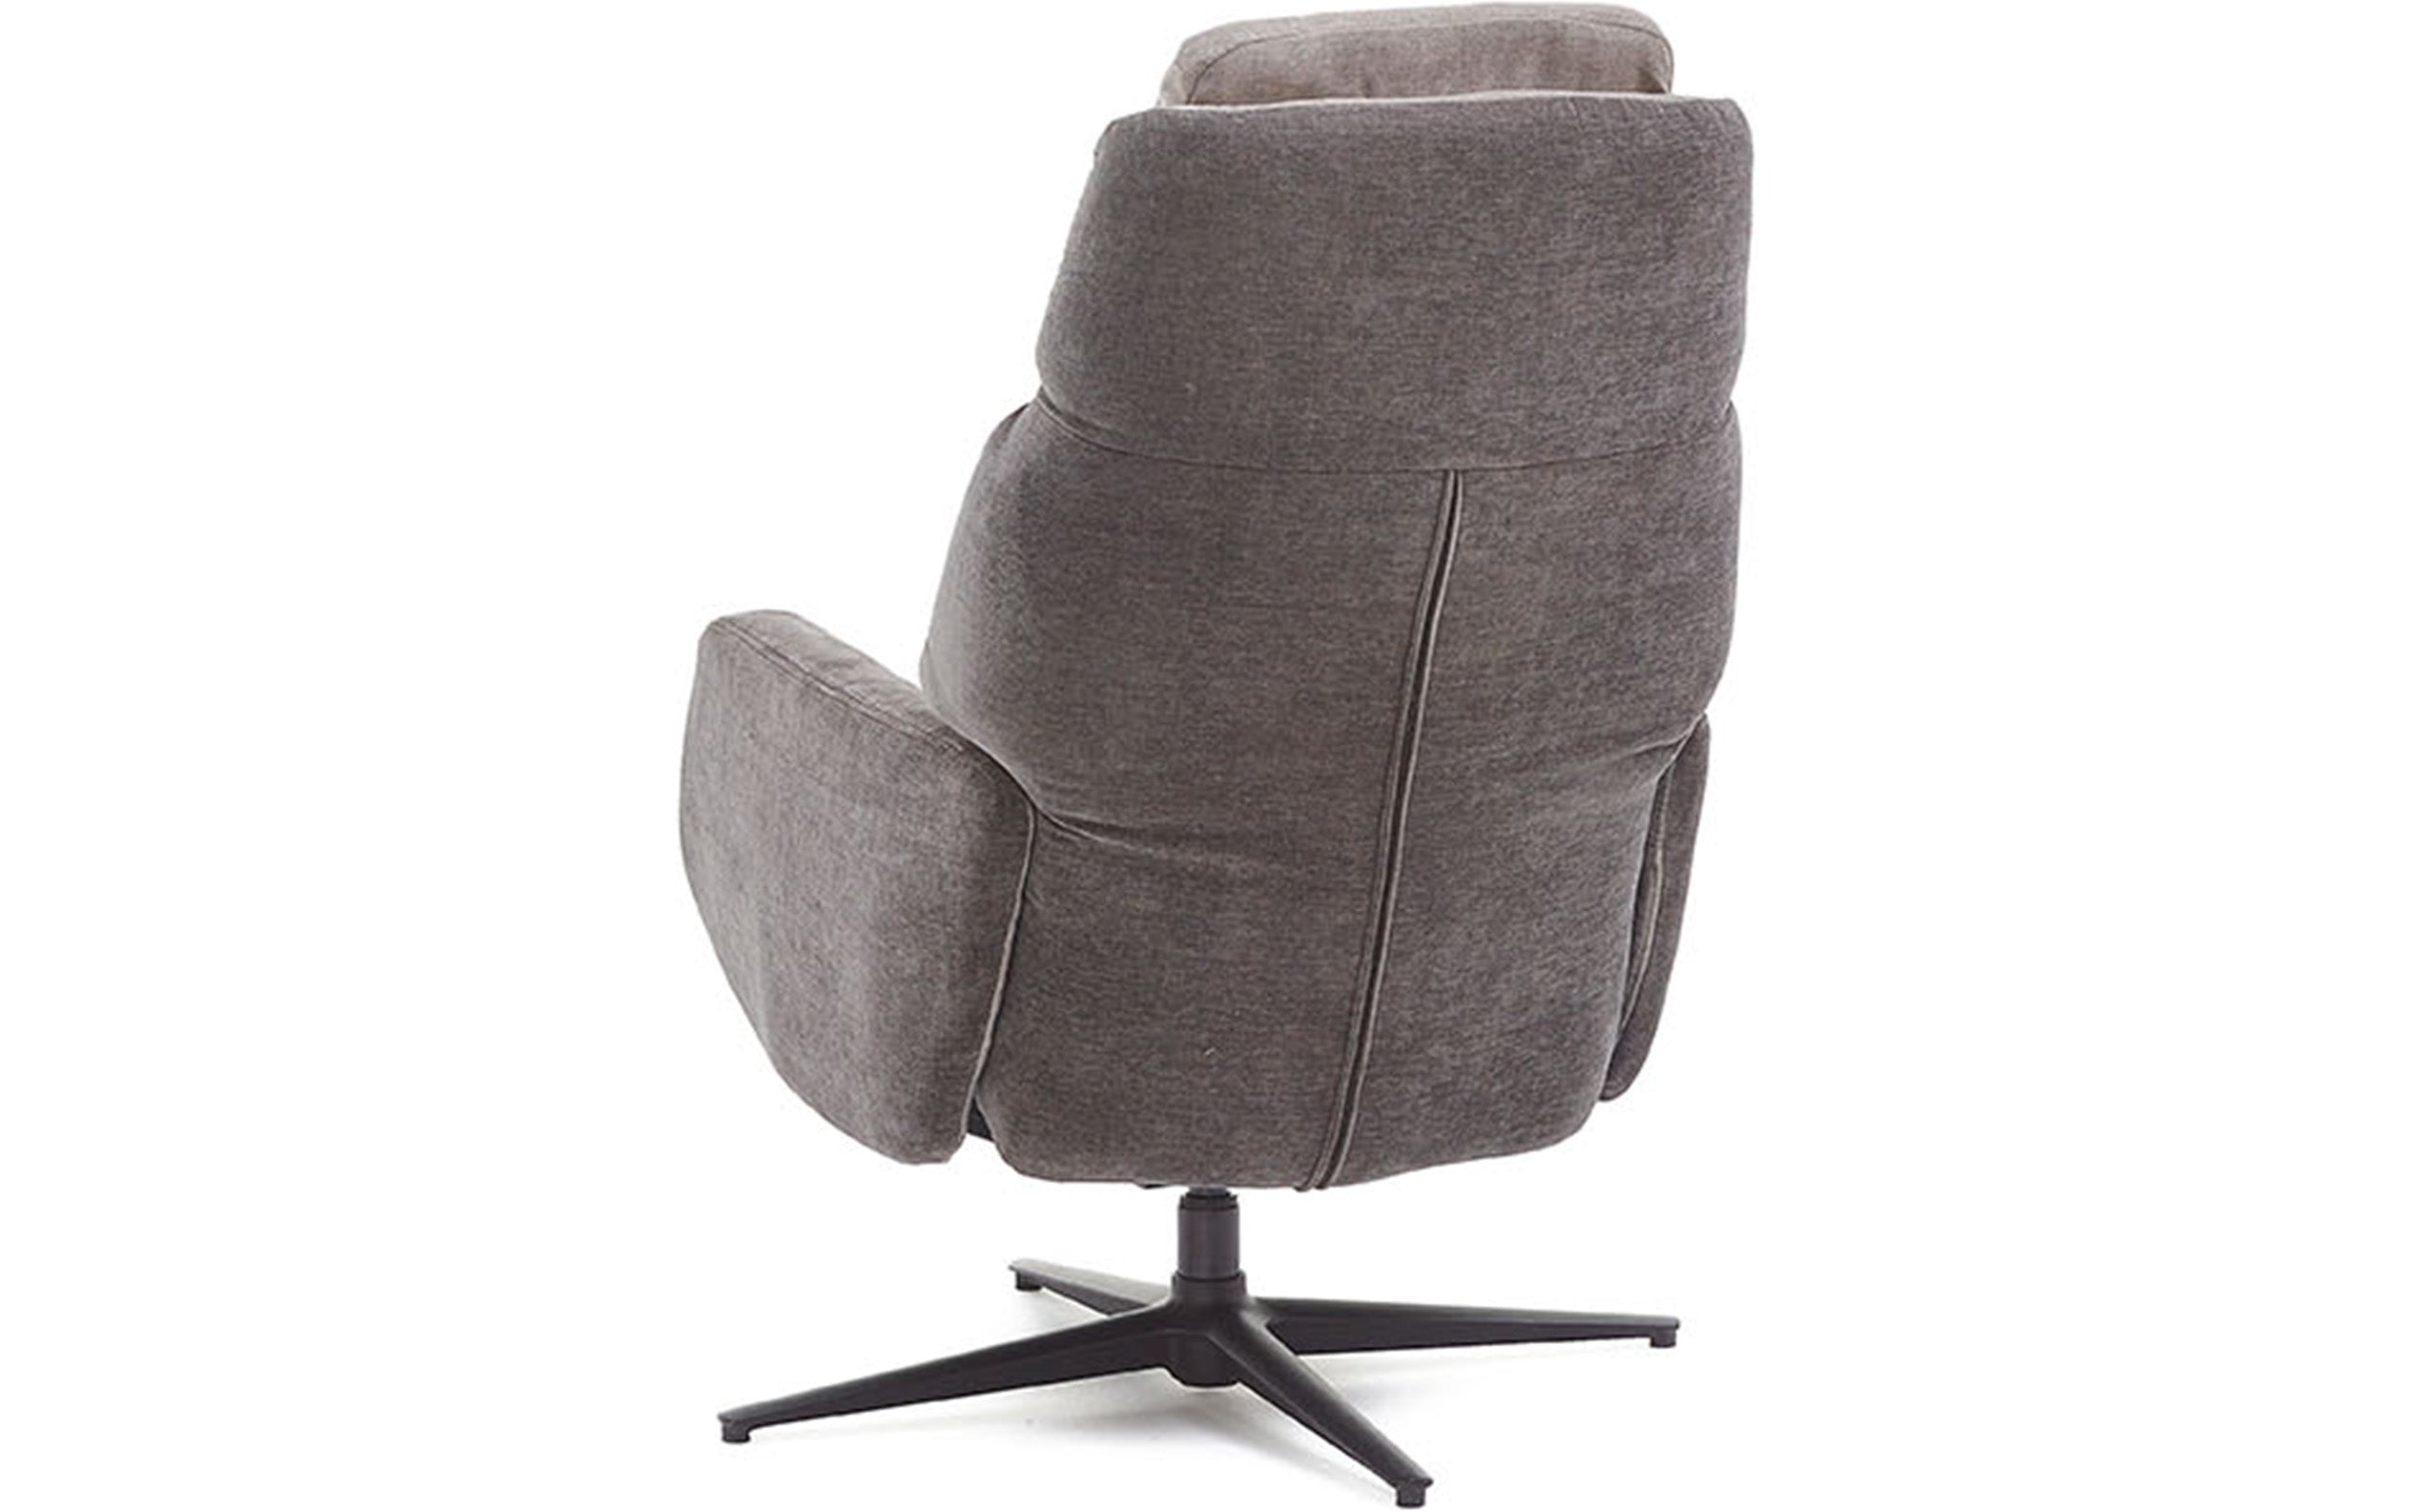 Parma relax chair